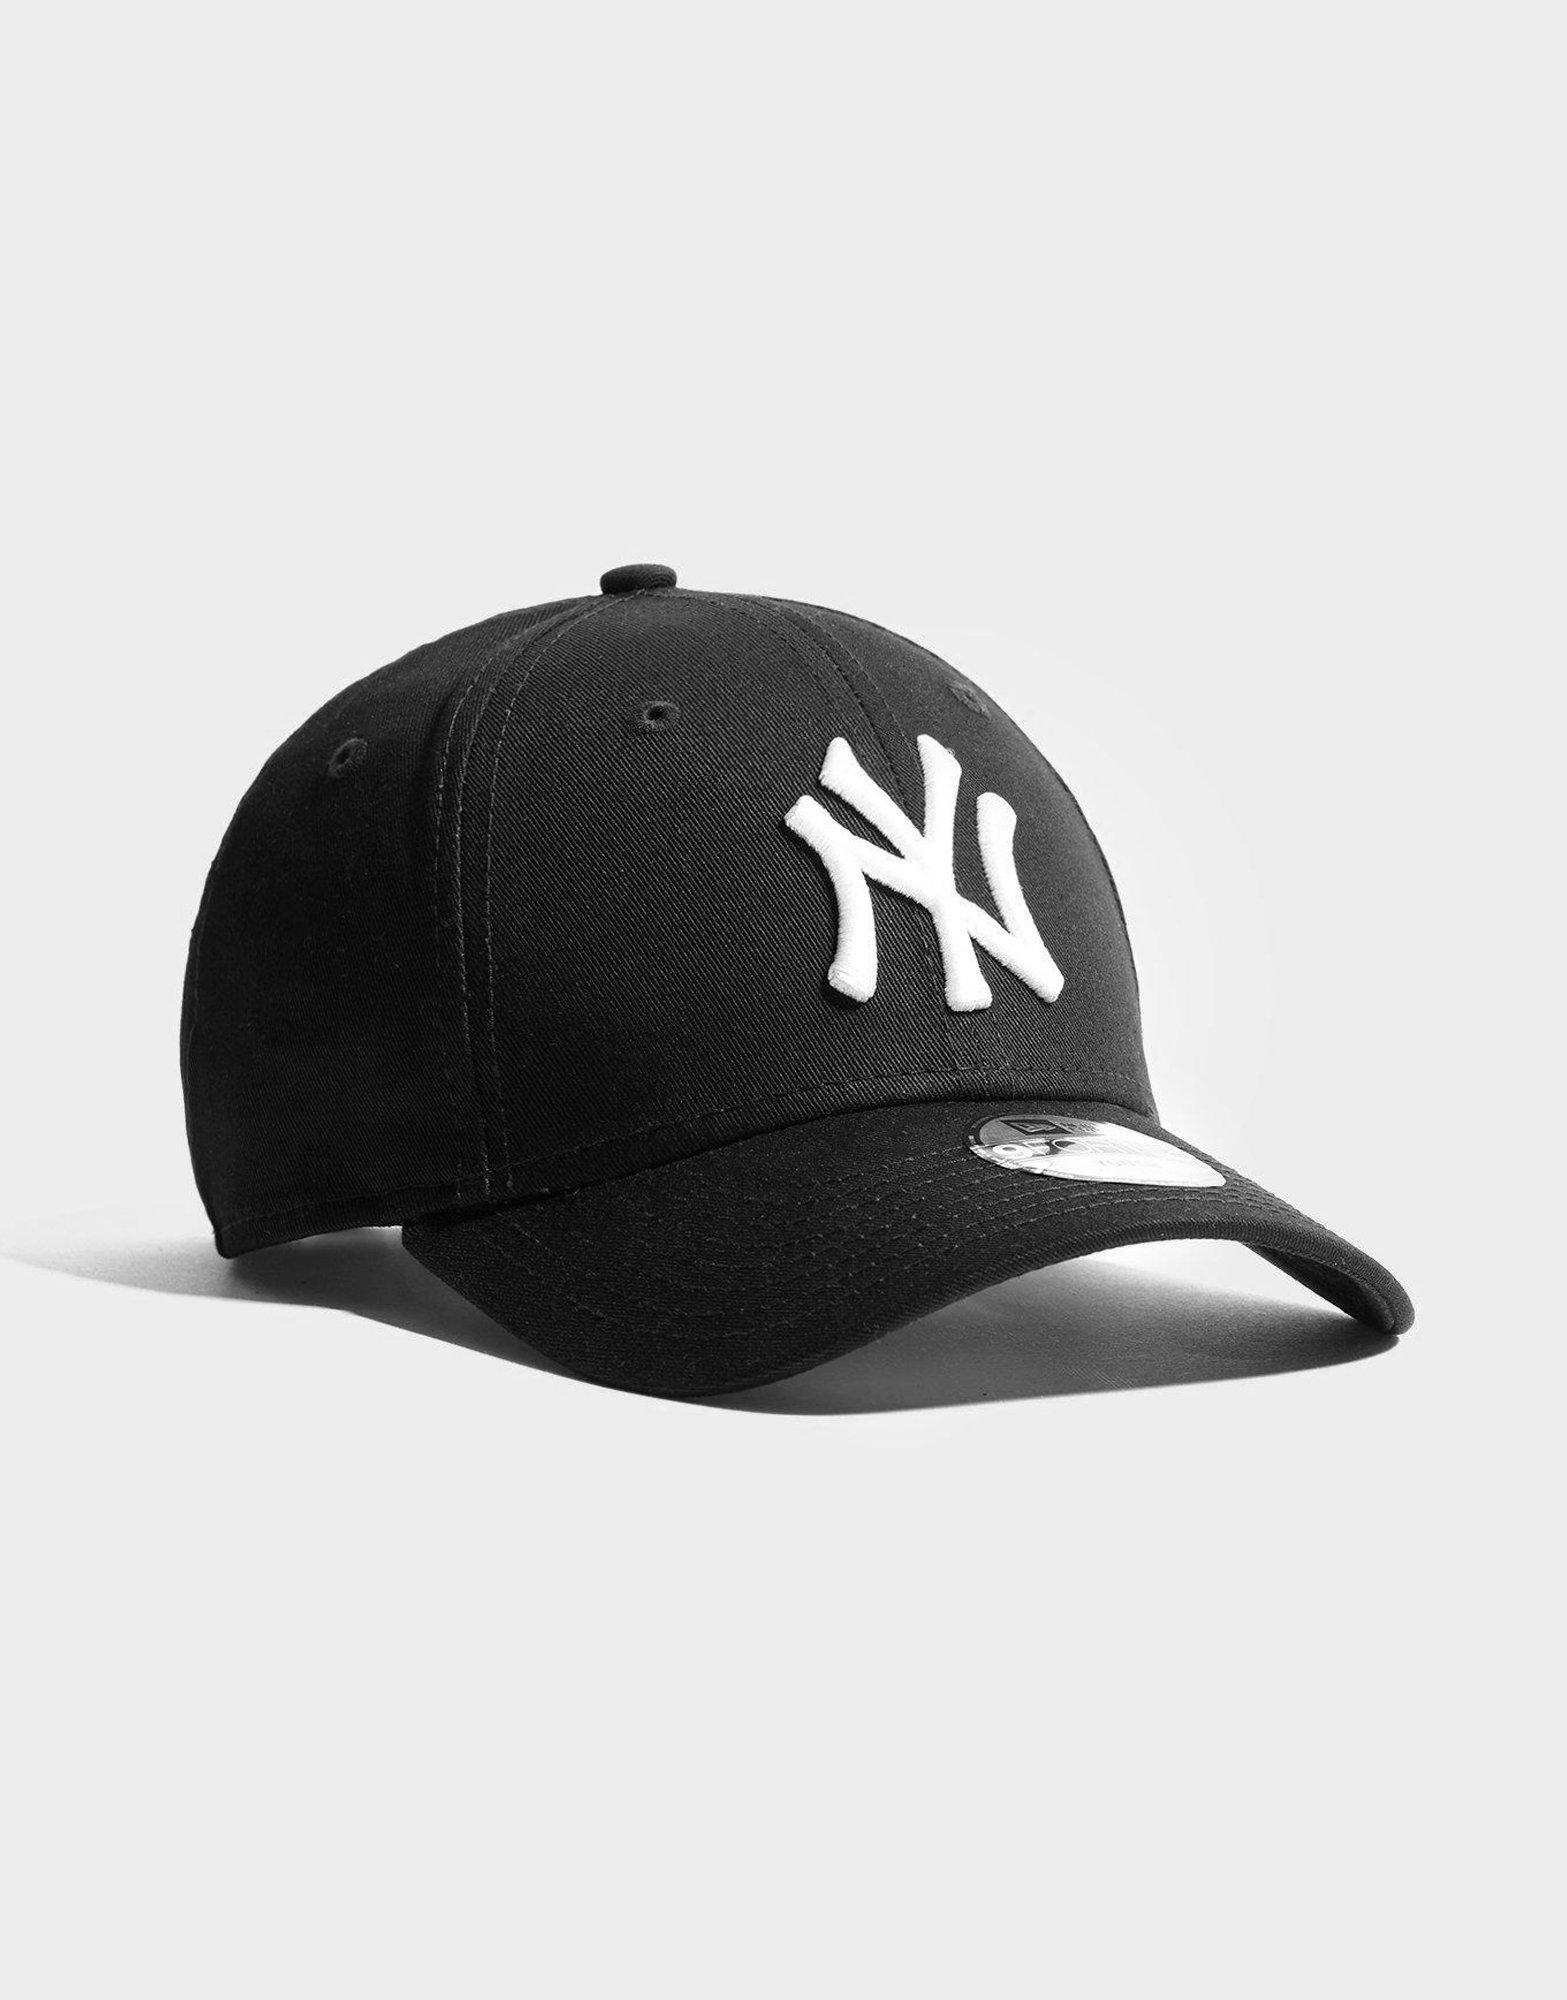 New Era Europe - The Cap Exclusively available at Saint Laurent